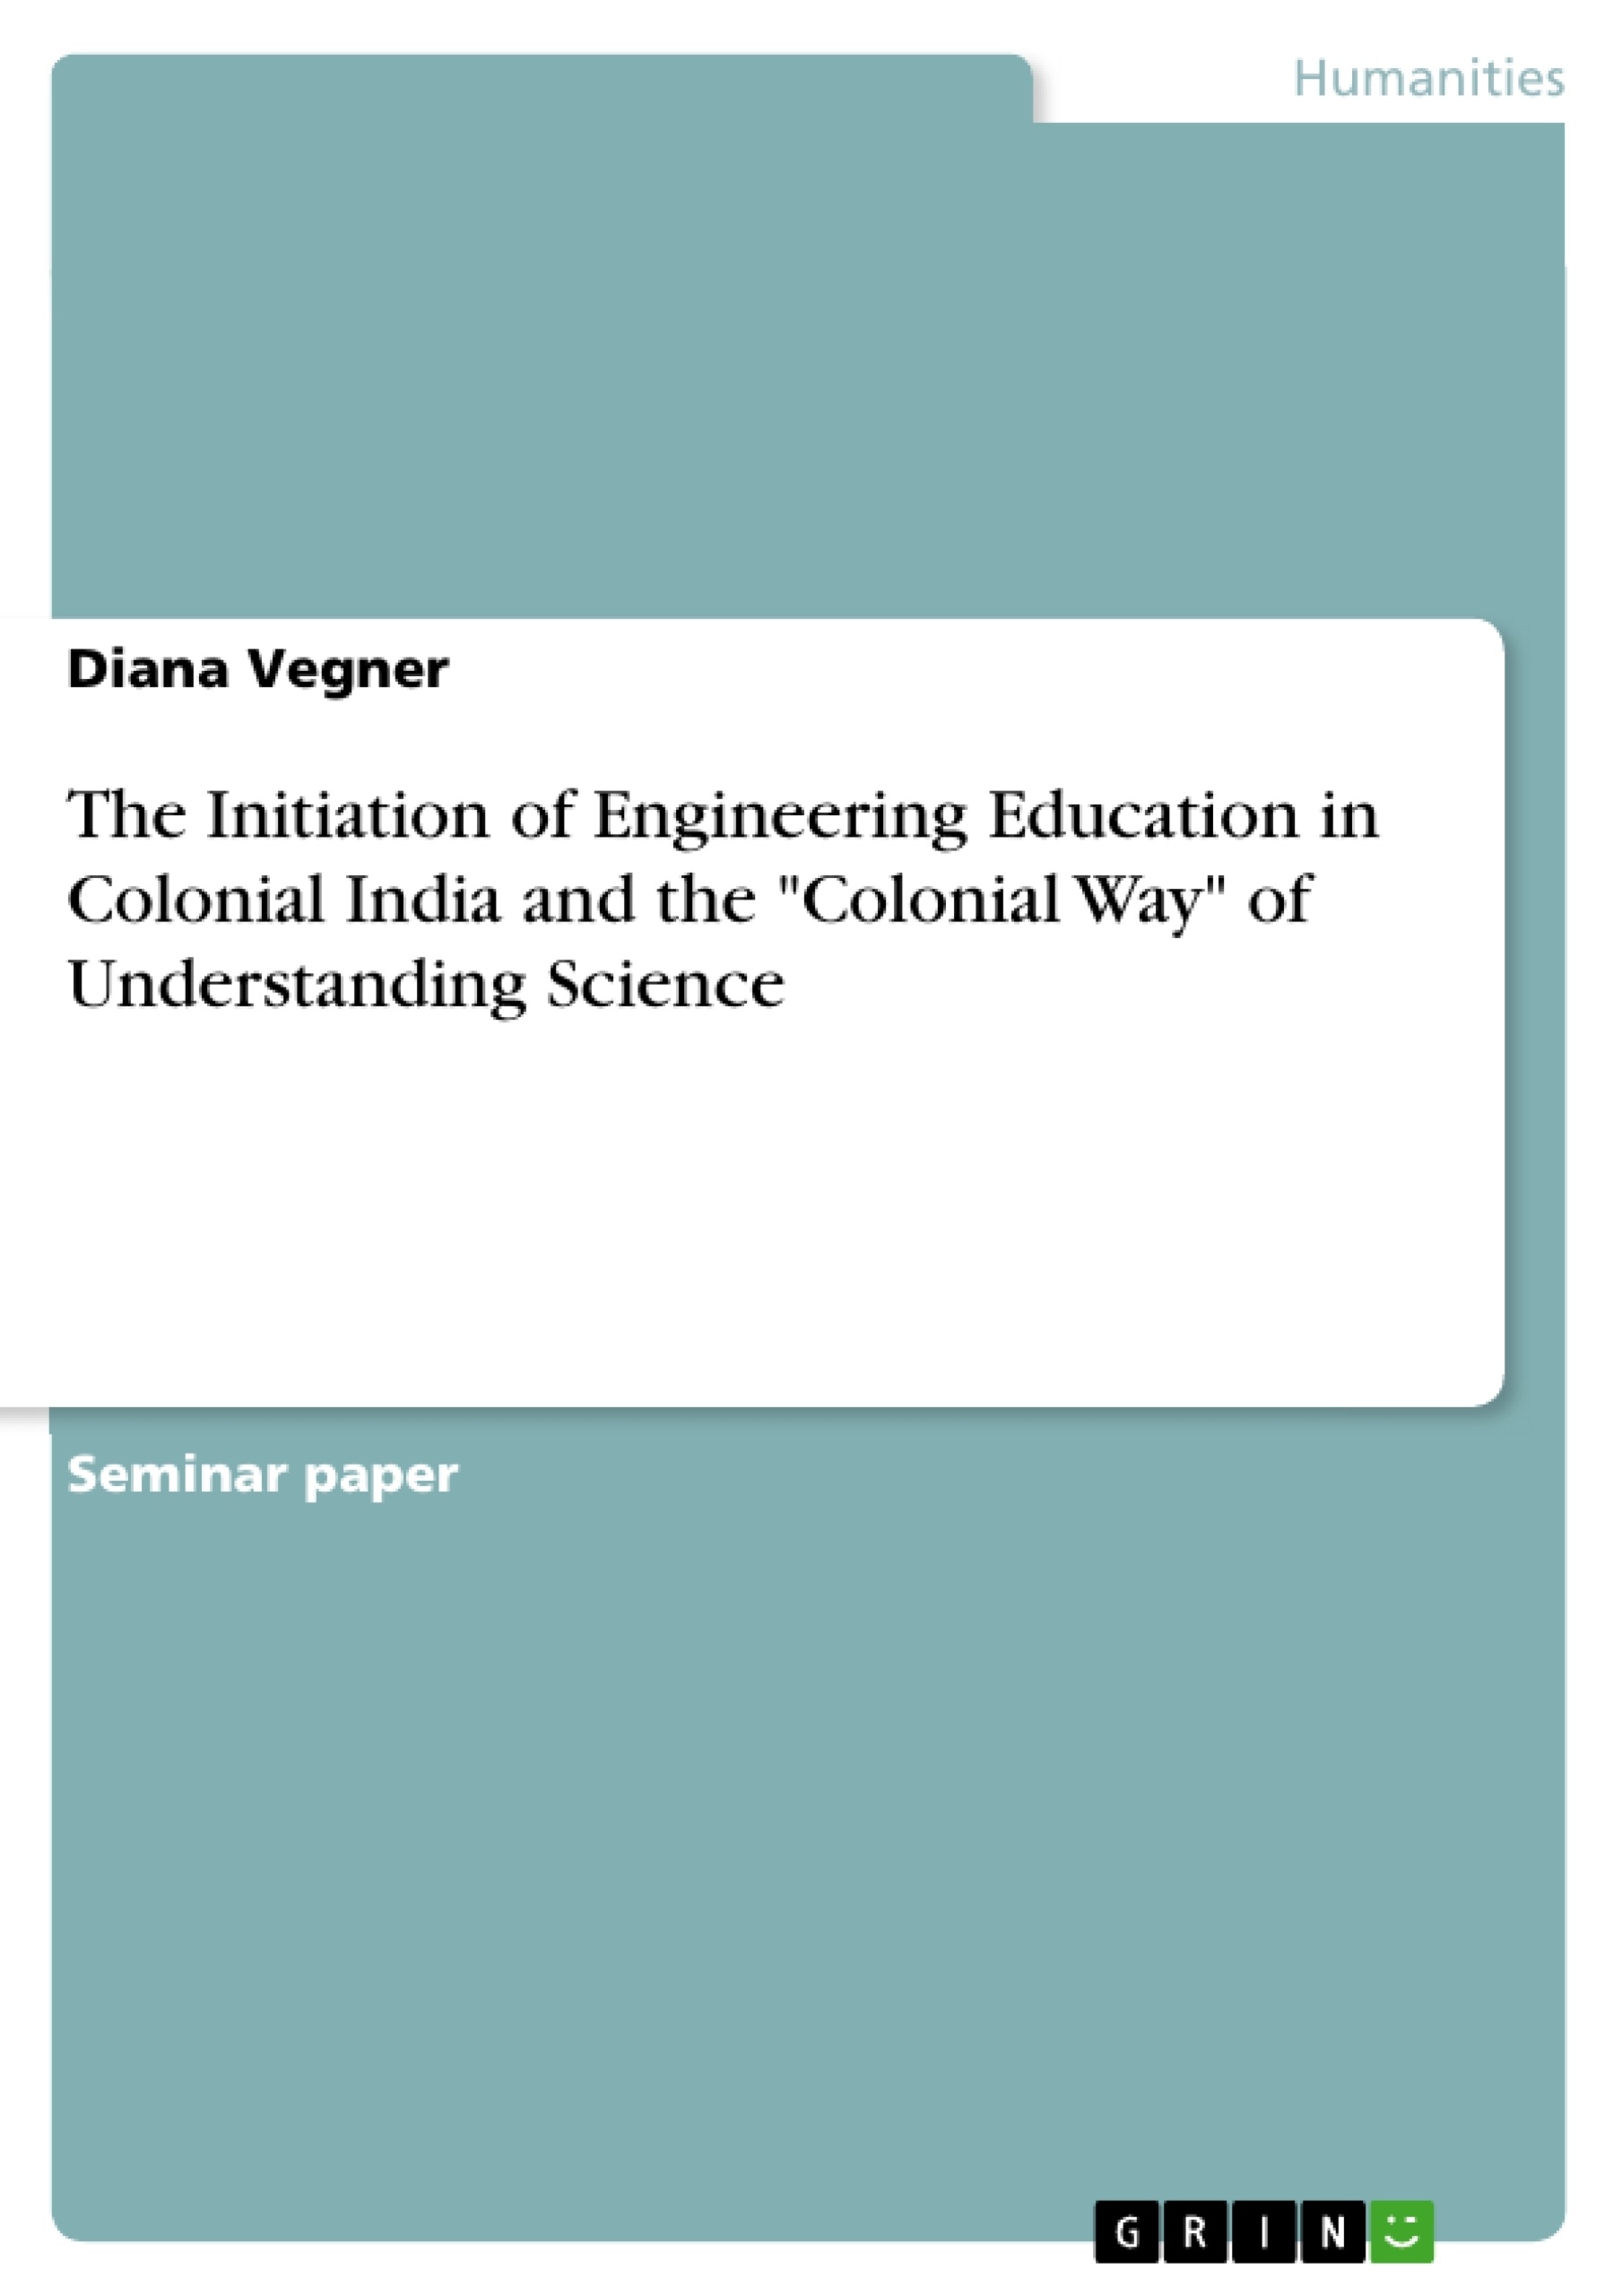 Título: The Initiation of Engineering Education in Colonial India and the "Colonial Way" of Understanding Science